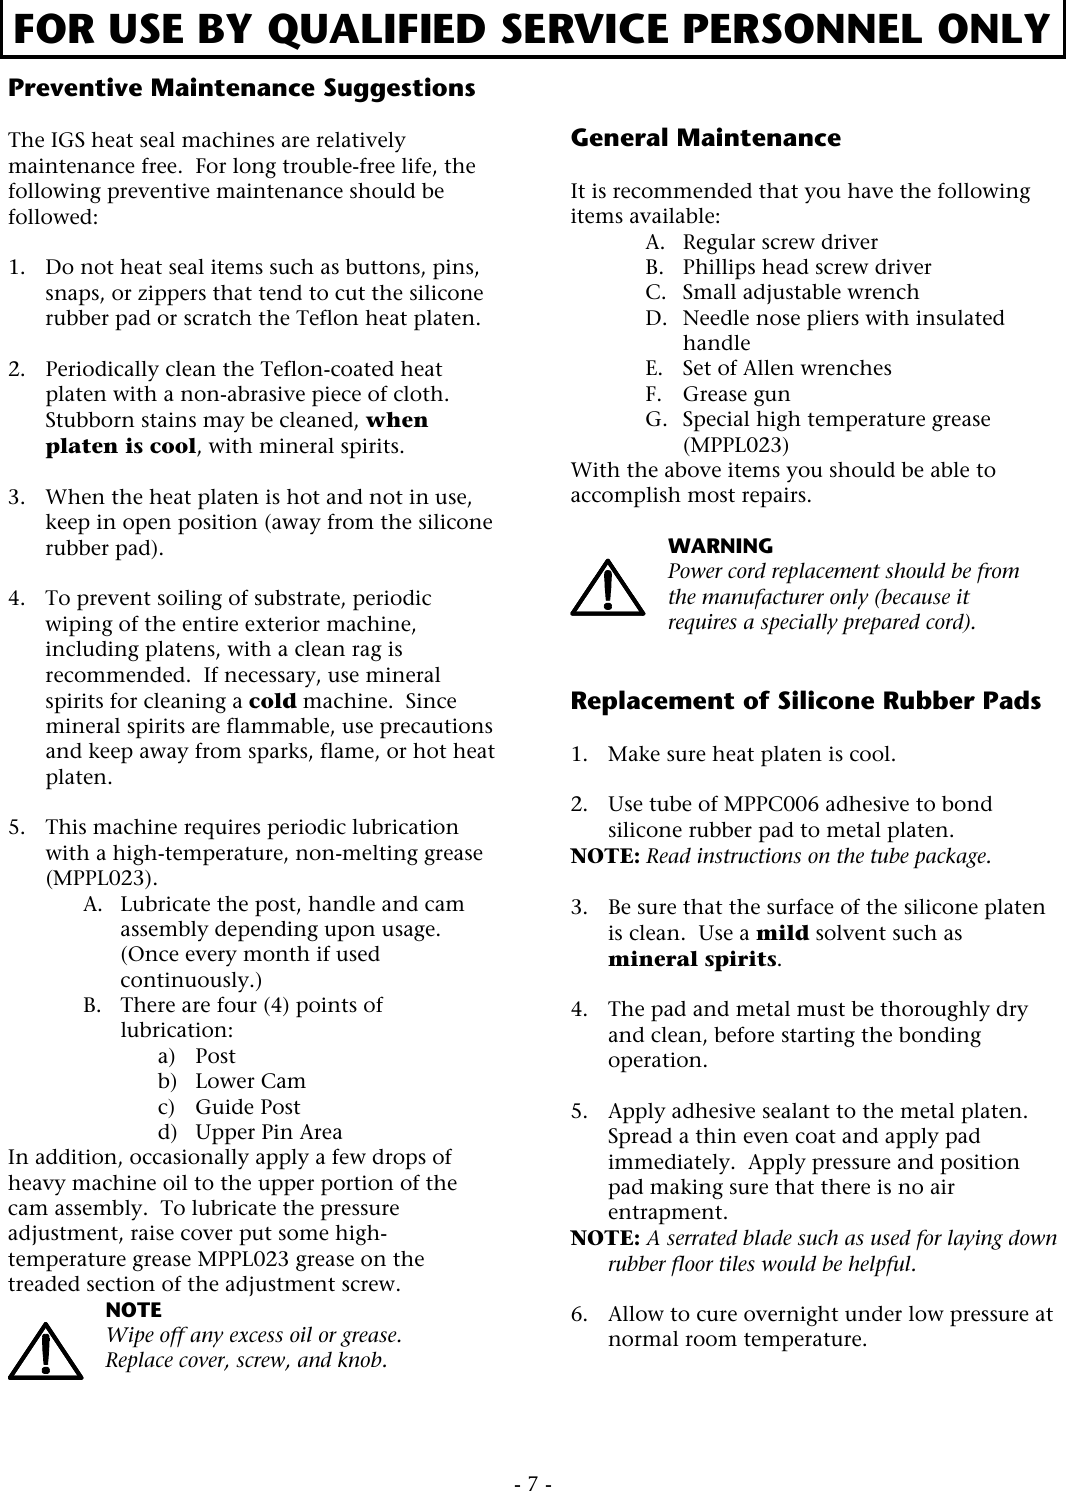 Page 7 of 12 - ACE&EASTMAN Instagraphic 204 Parts & Instructions - 204A Manual English 040819 User